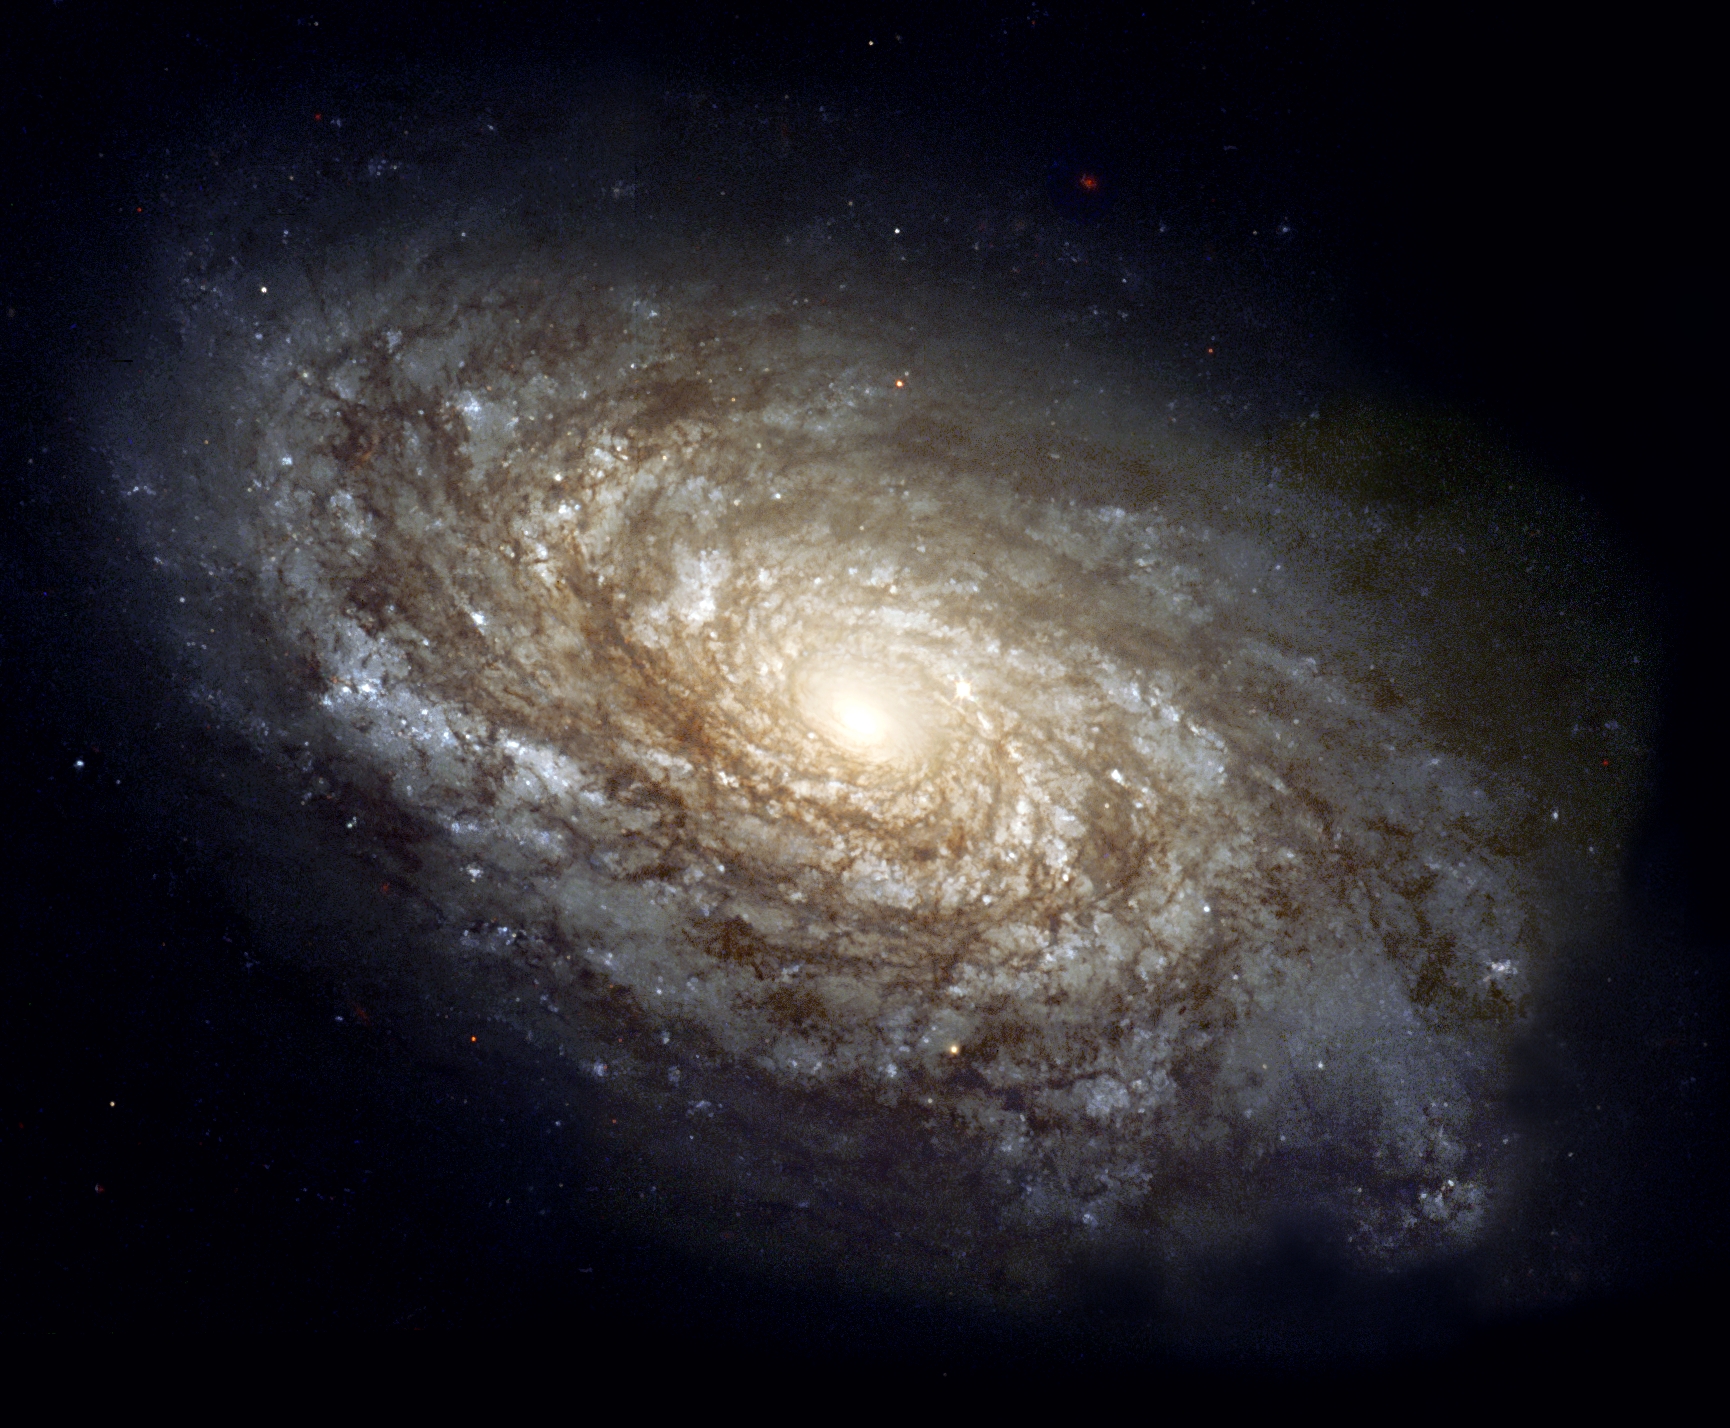 NGC 4414, a typical spiral galaxy in the constellation Coma Berenices, is about 55,000 light-years in diameter and approximately 60 million light-years from Earth.